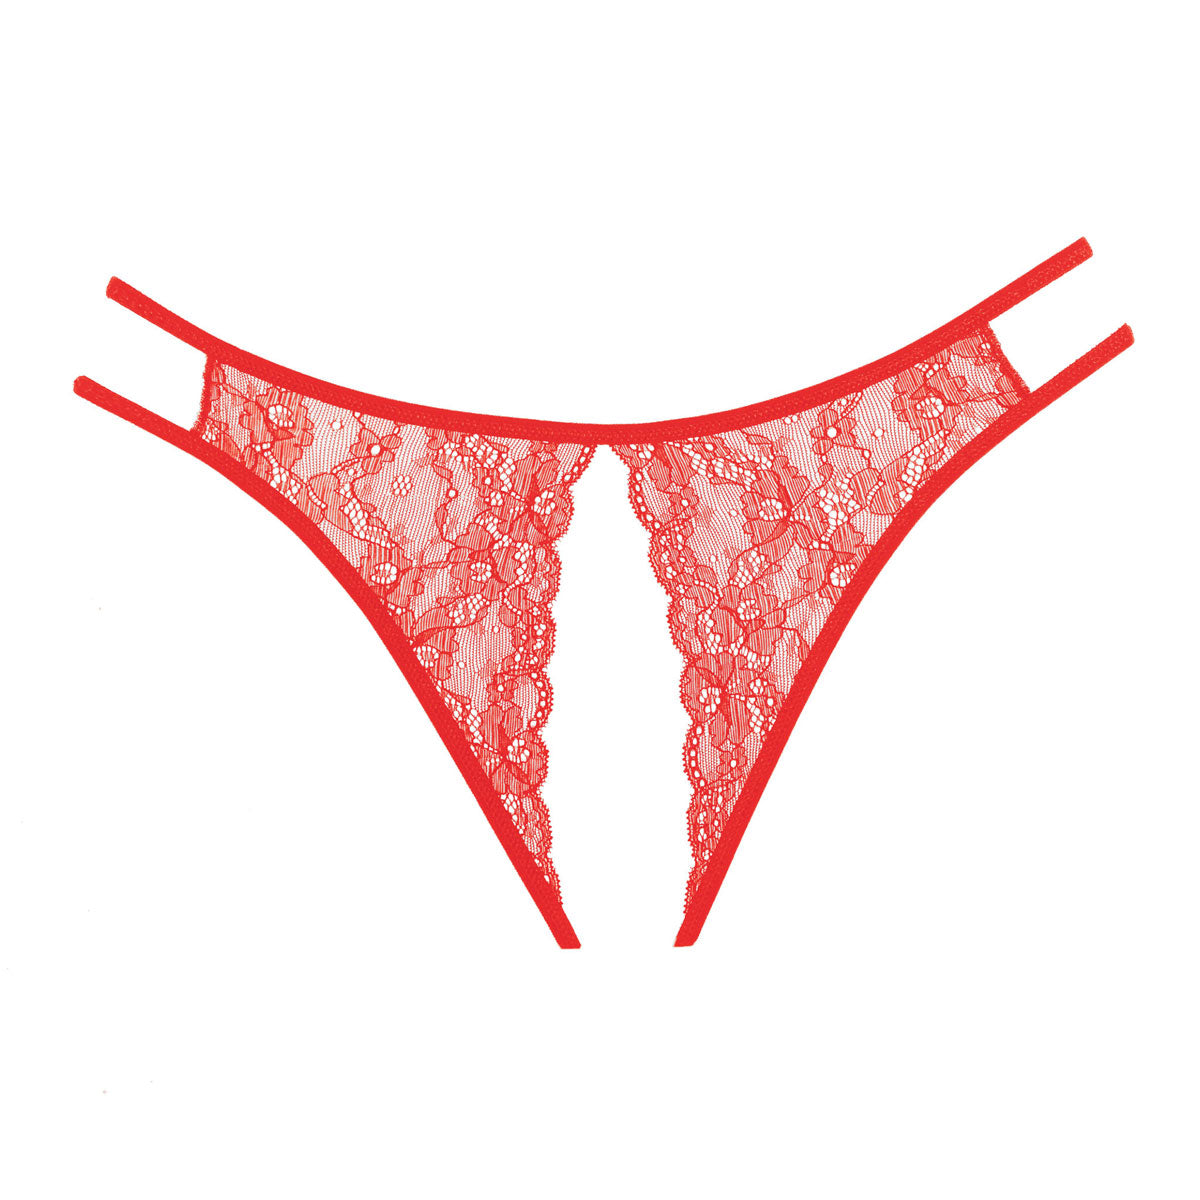 Allure Adore – Crotchless Scalloped Lace Honey Panty - Red